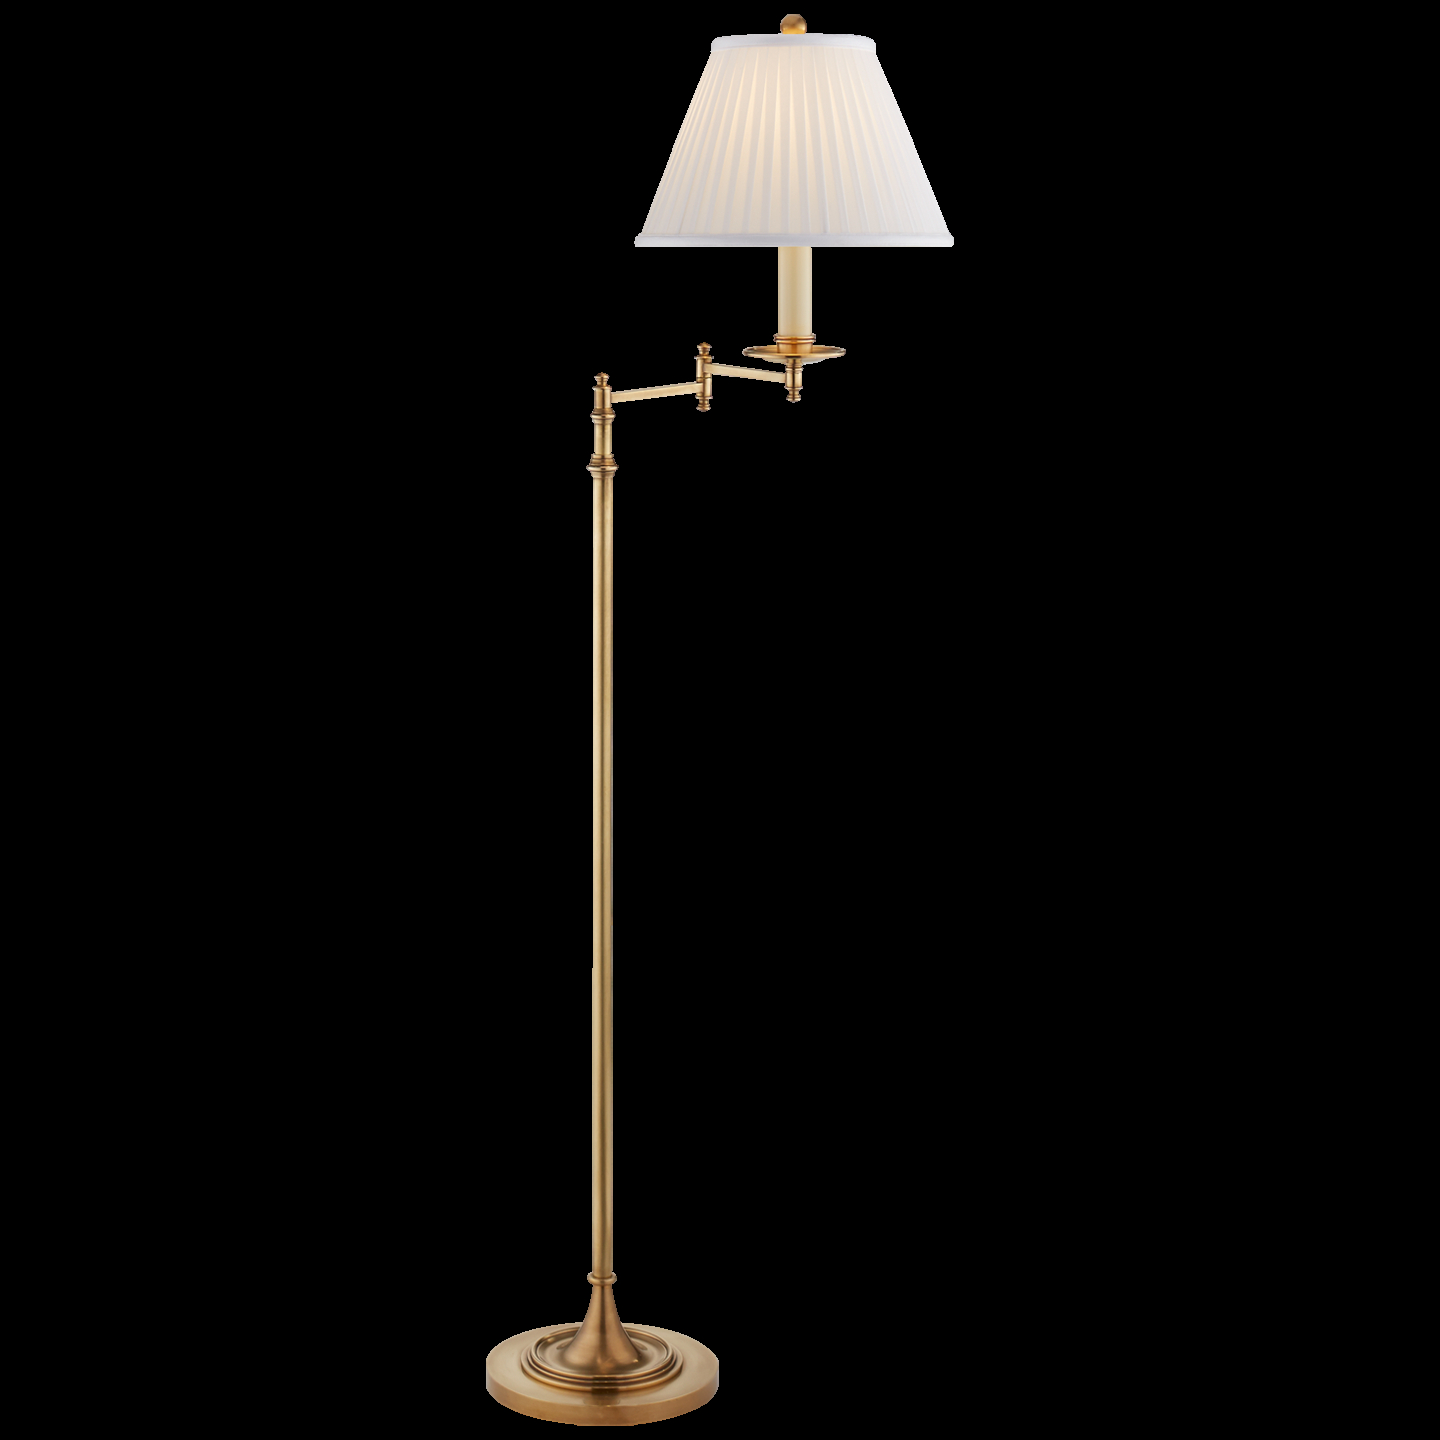 Dorchester Swing Arm Floor Lamp In 2019 Floor Lamp Swing with dimensions 1440 X 1440